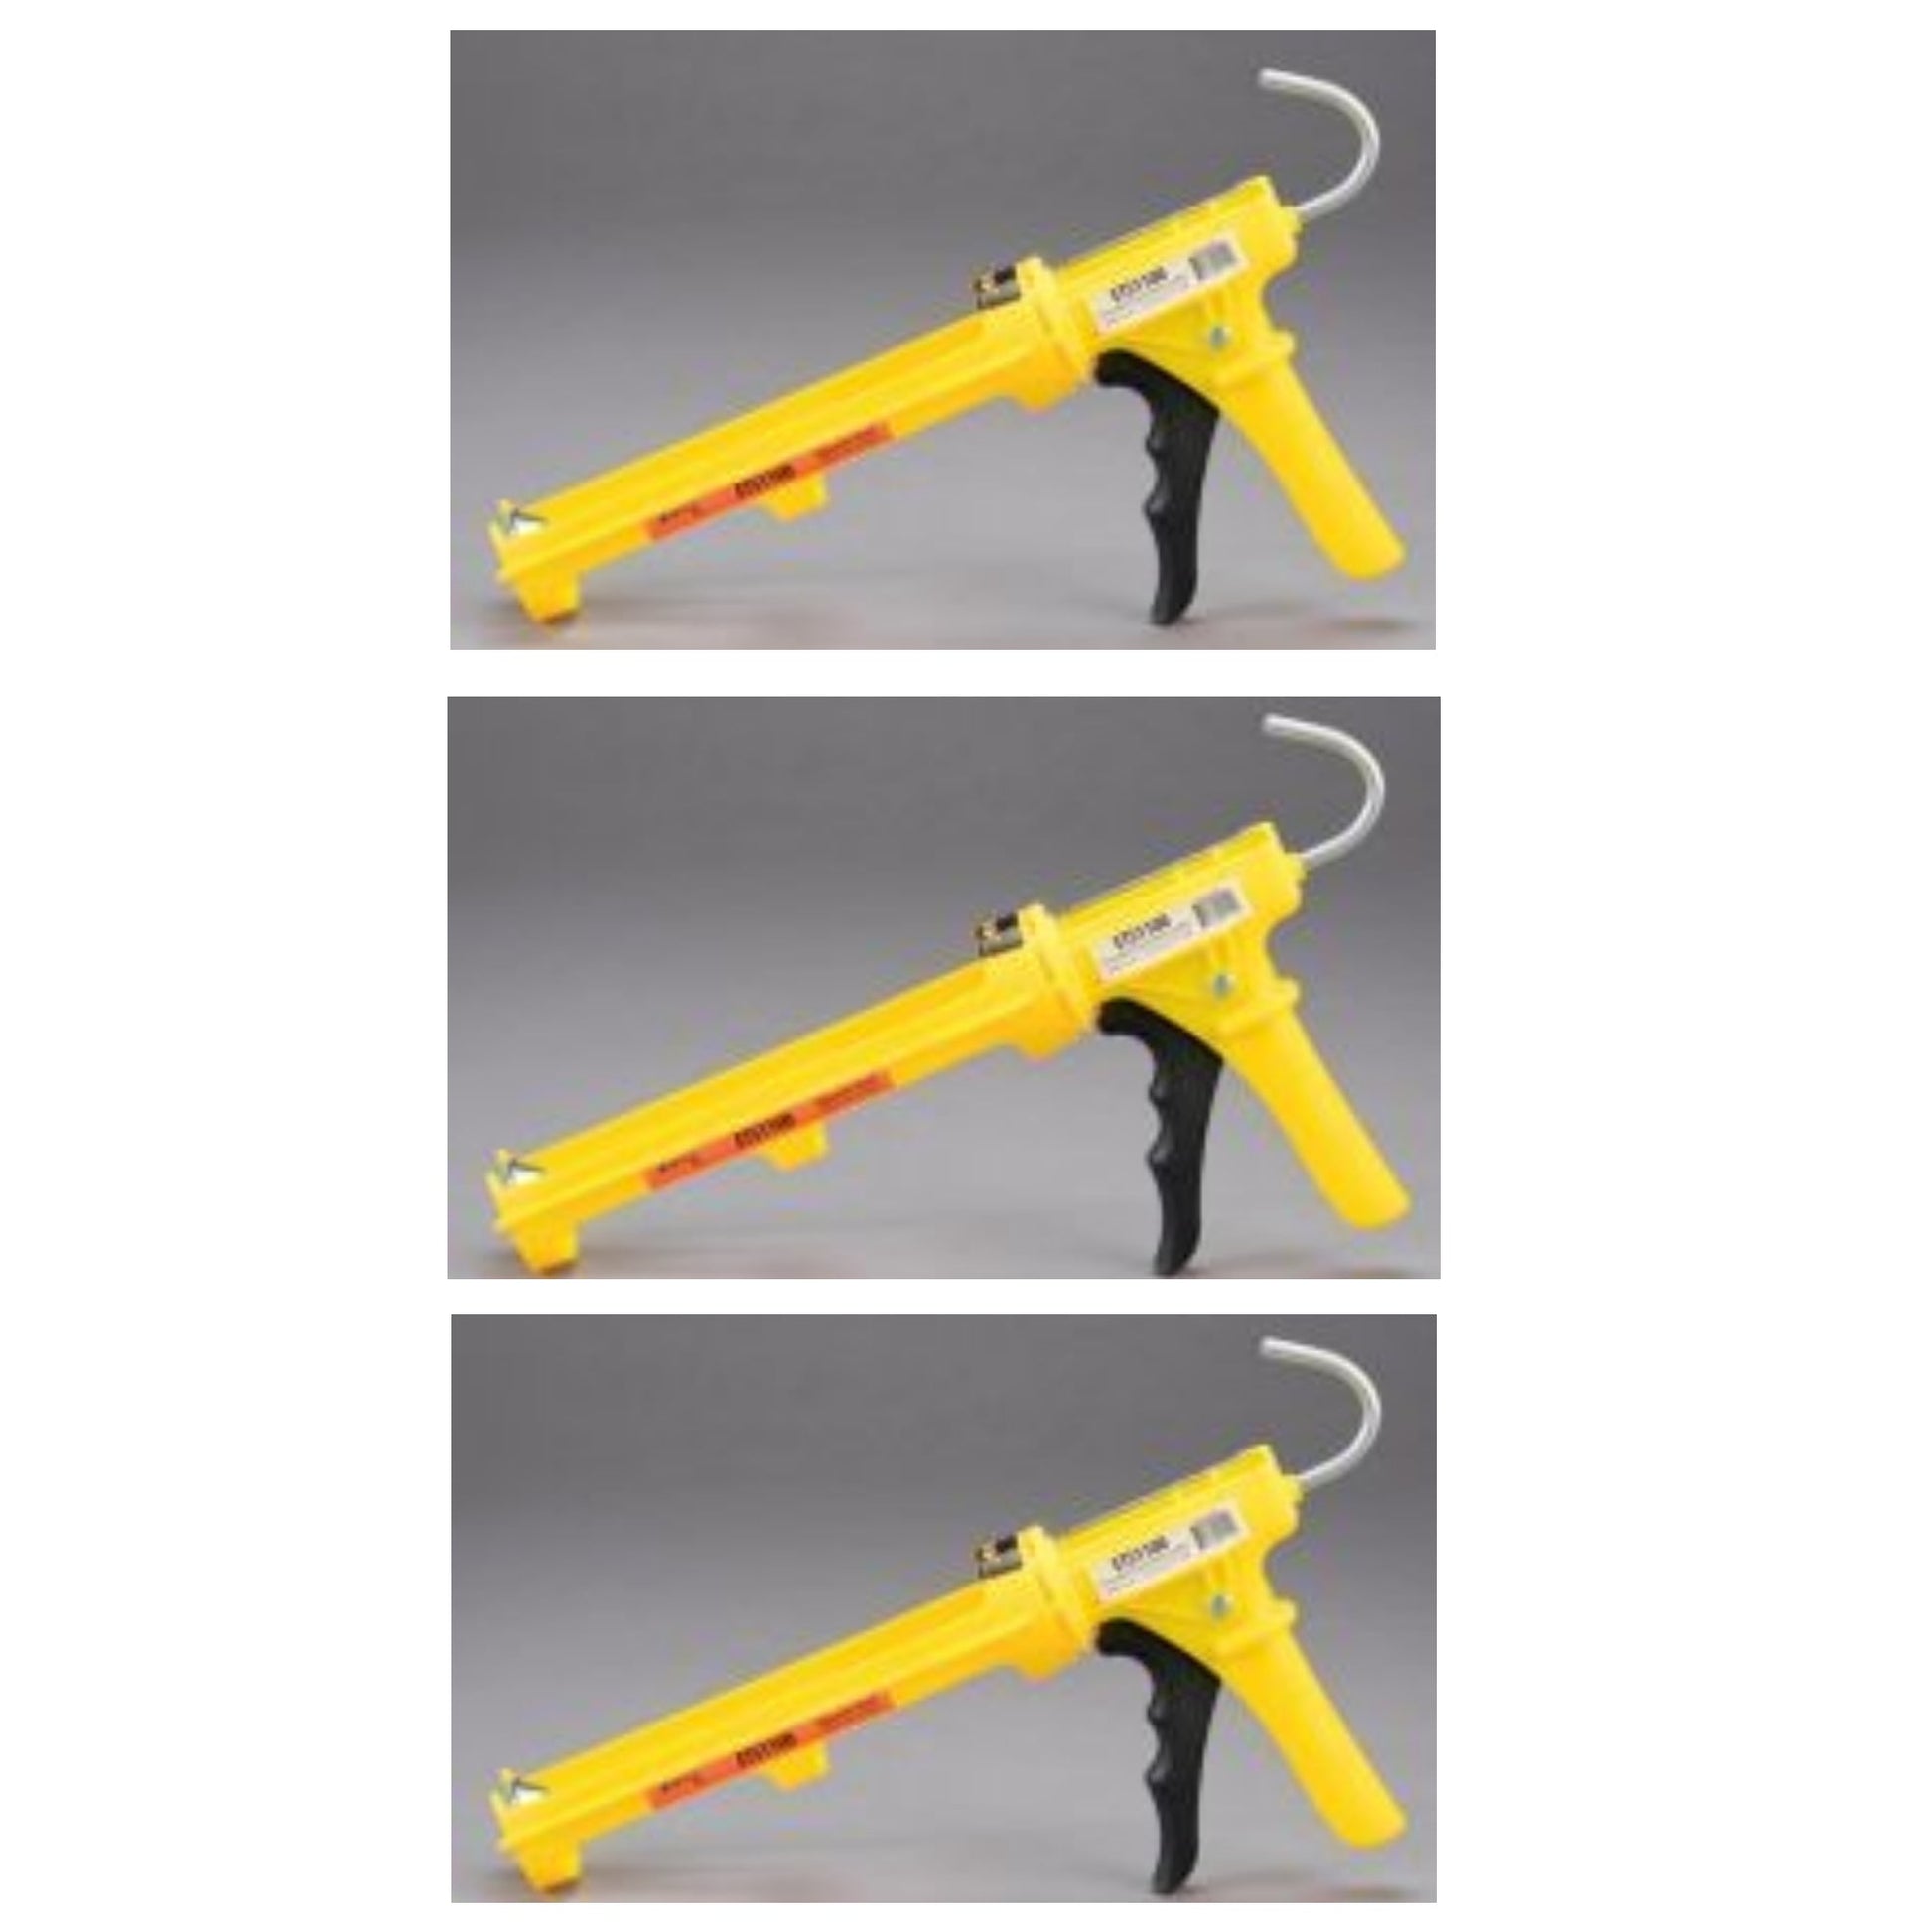 Three images showing the same yellow and black Perma Cover Dripless ETS1100 Caulking Gun - 10oz Composite Body, Full Time Dripless Function from different angles on a grey background. The lightweight composite body has a metal hook at the upper end and a trigger mechanism. The product is labeled with a barcode and some text, indicating its 10:1 thrust ratio.